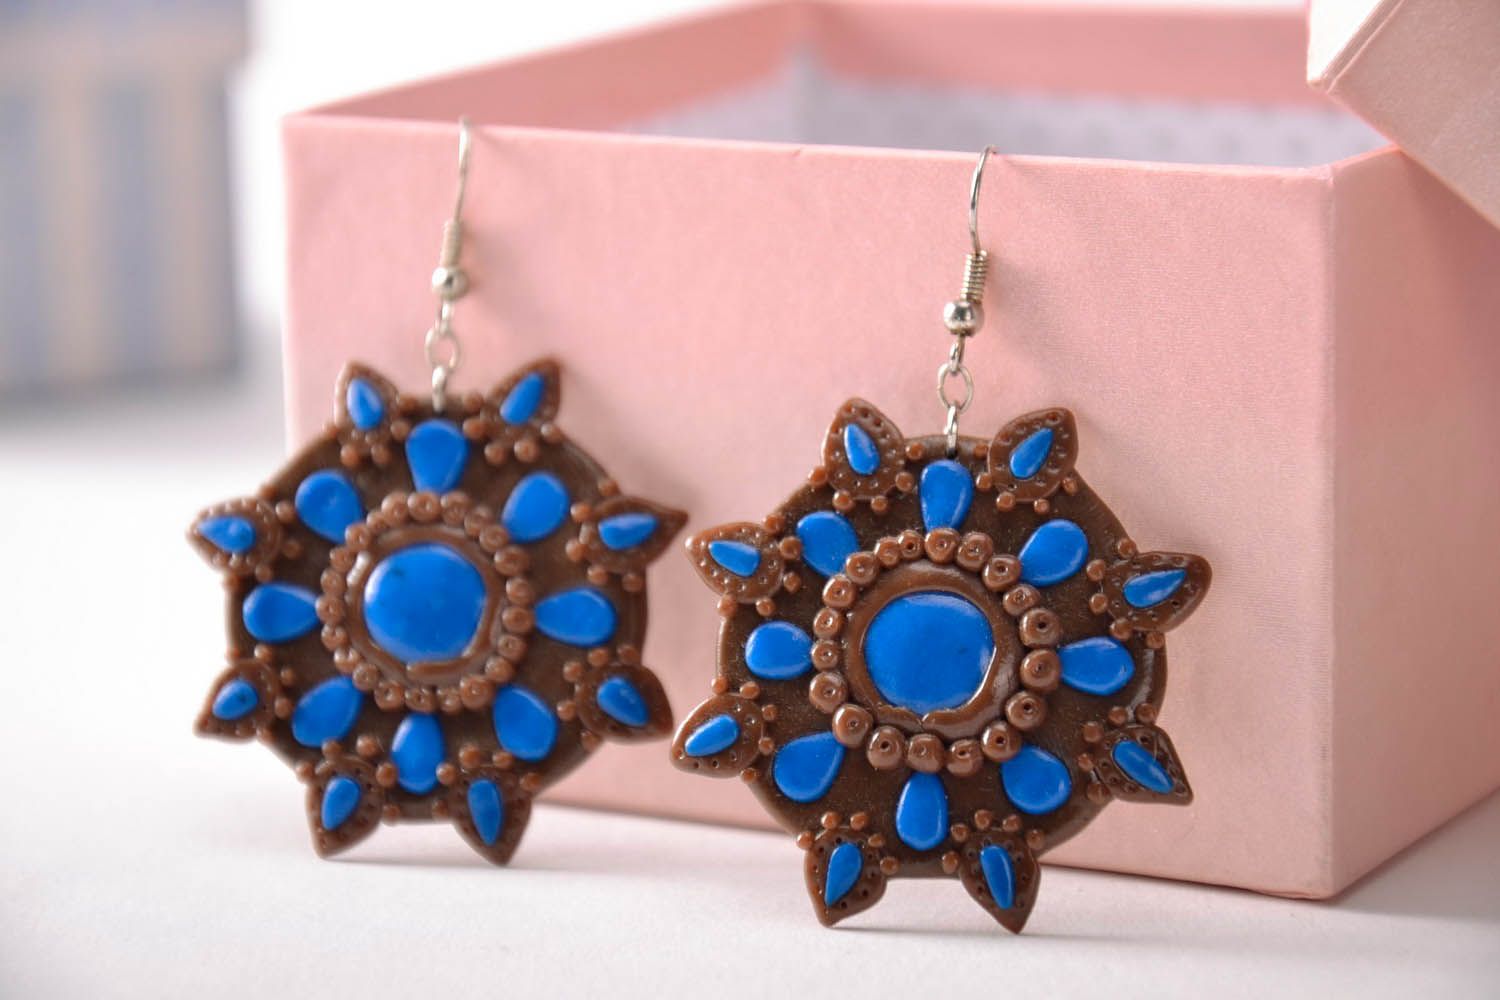 Earrings made of metal and polymer clay photo 3